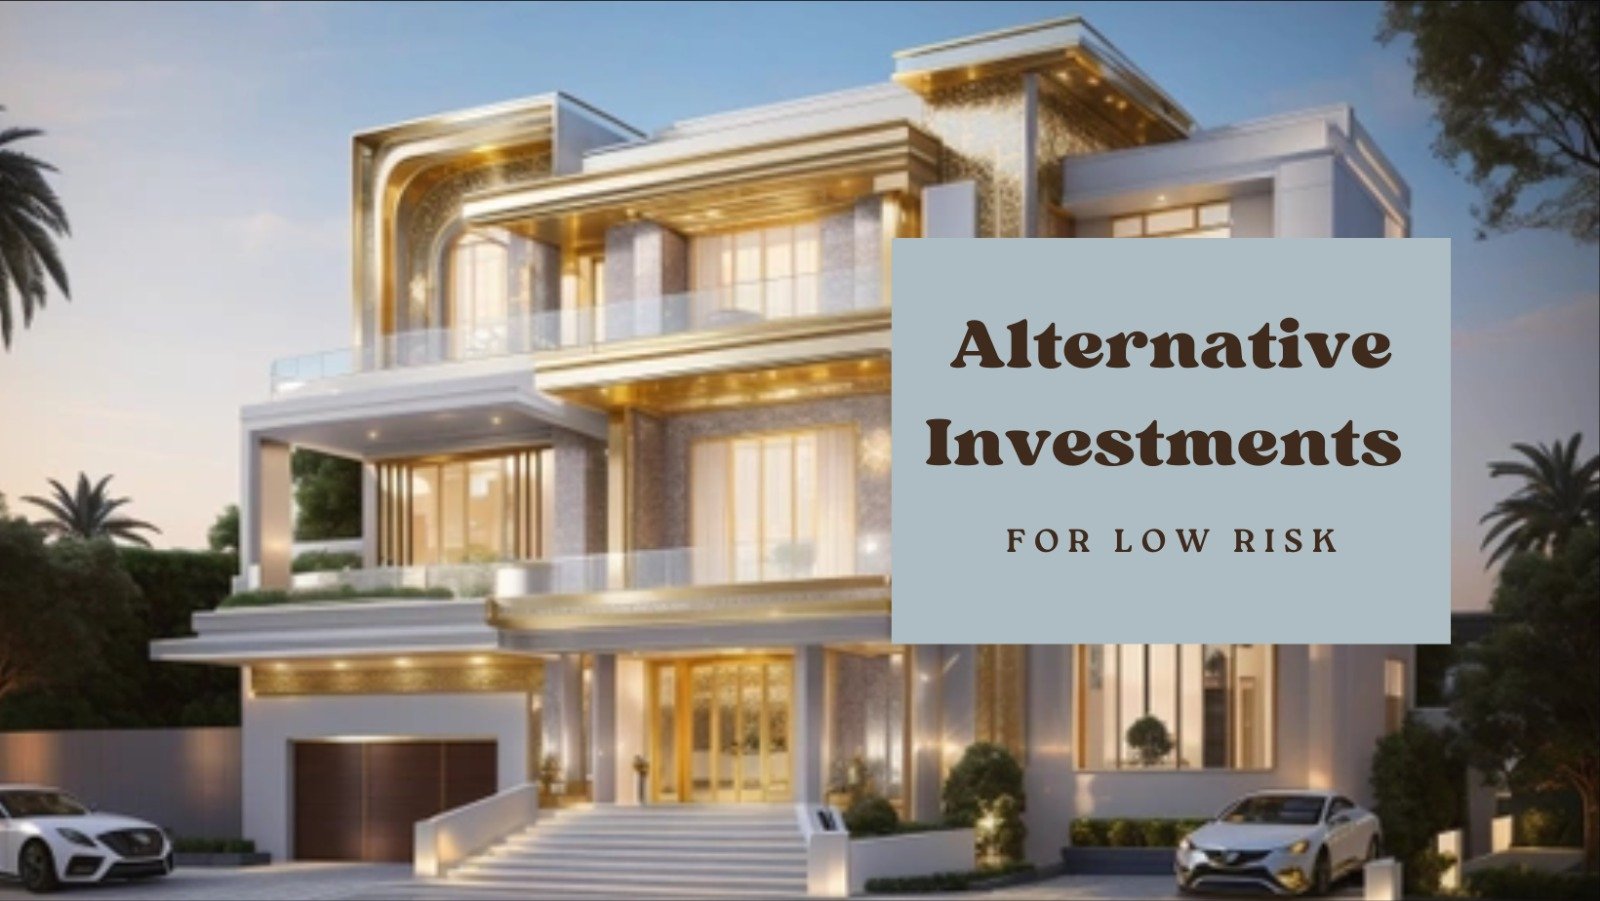 Alternative Investments for Low Risk